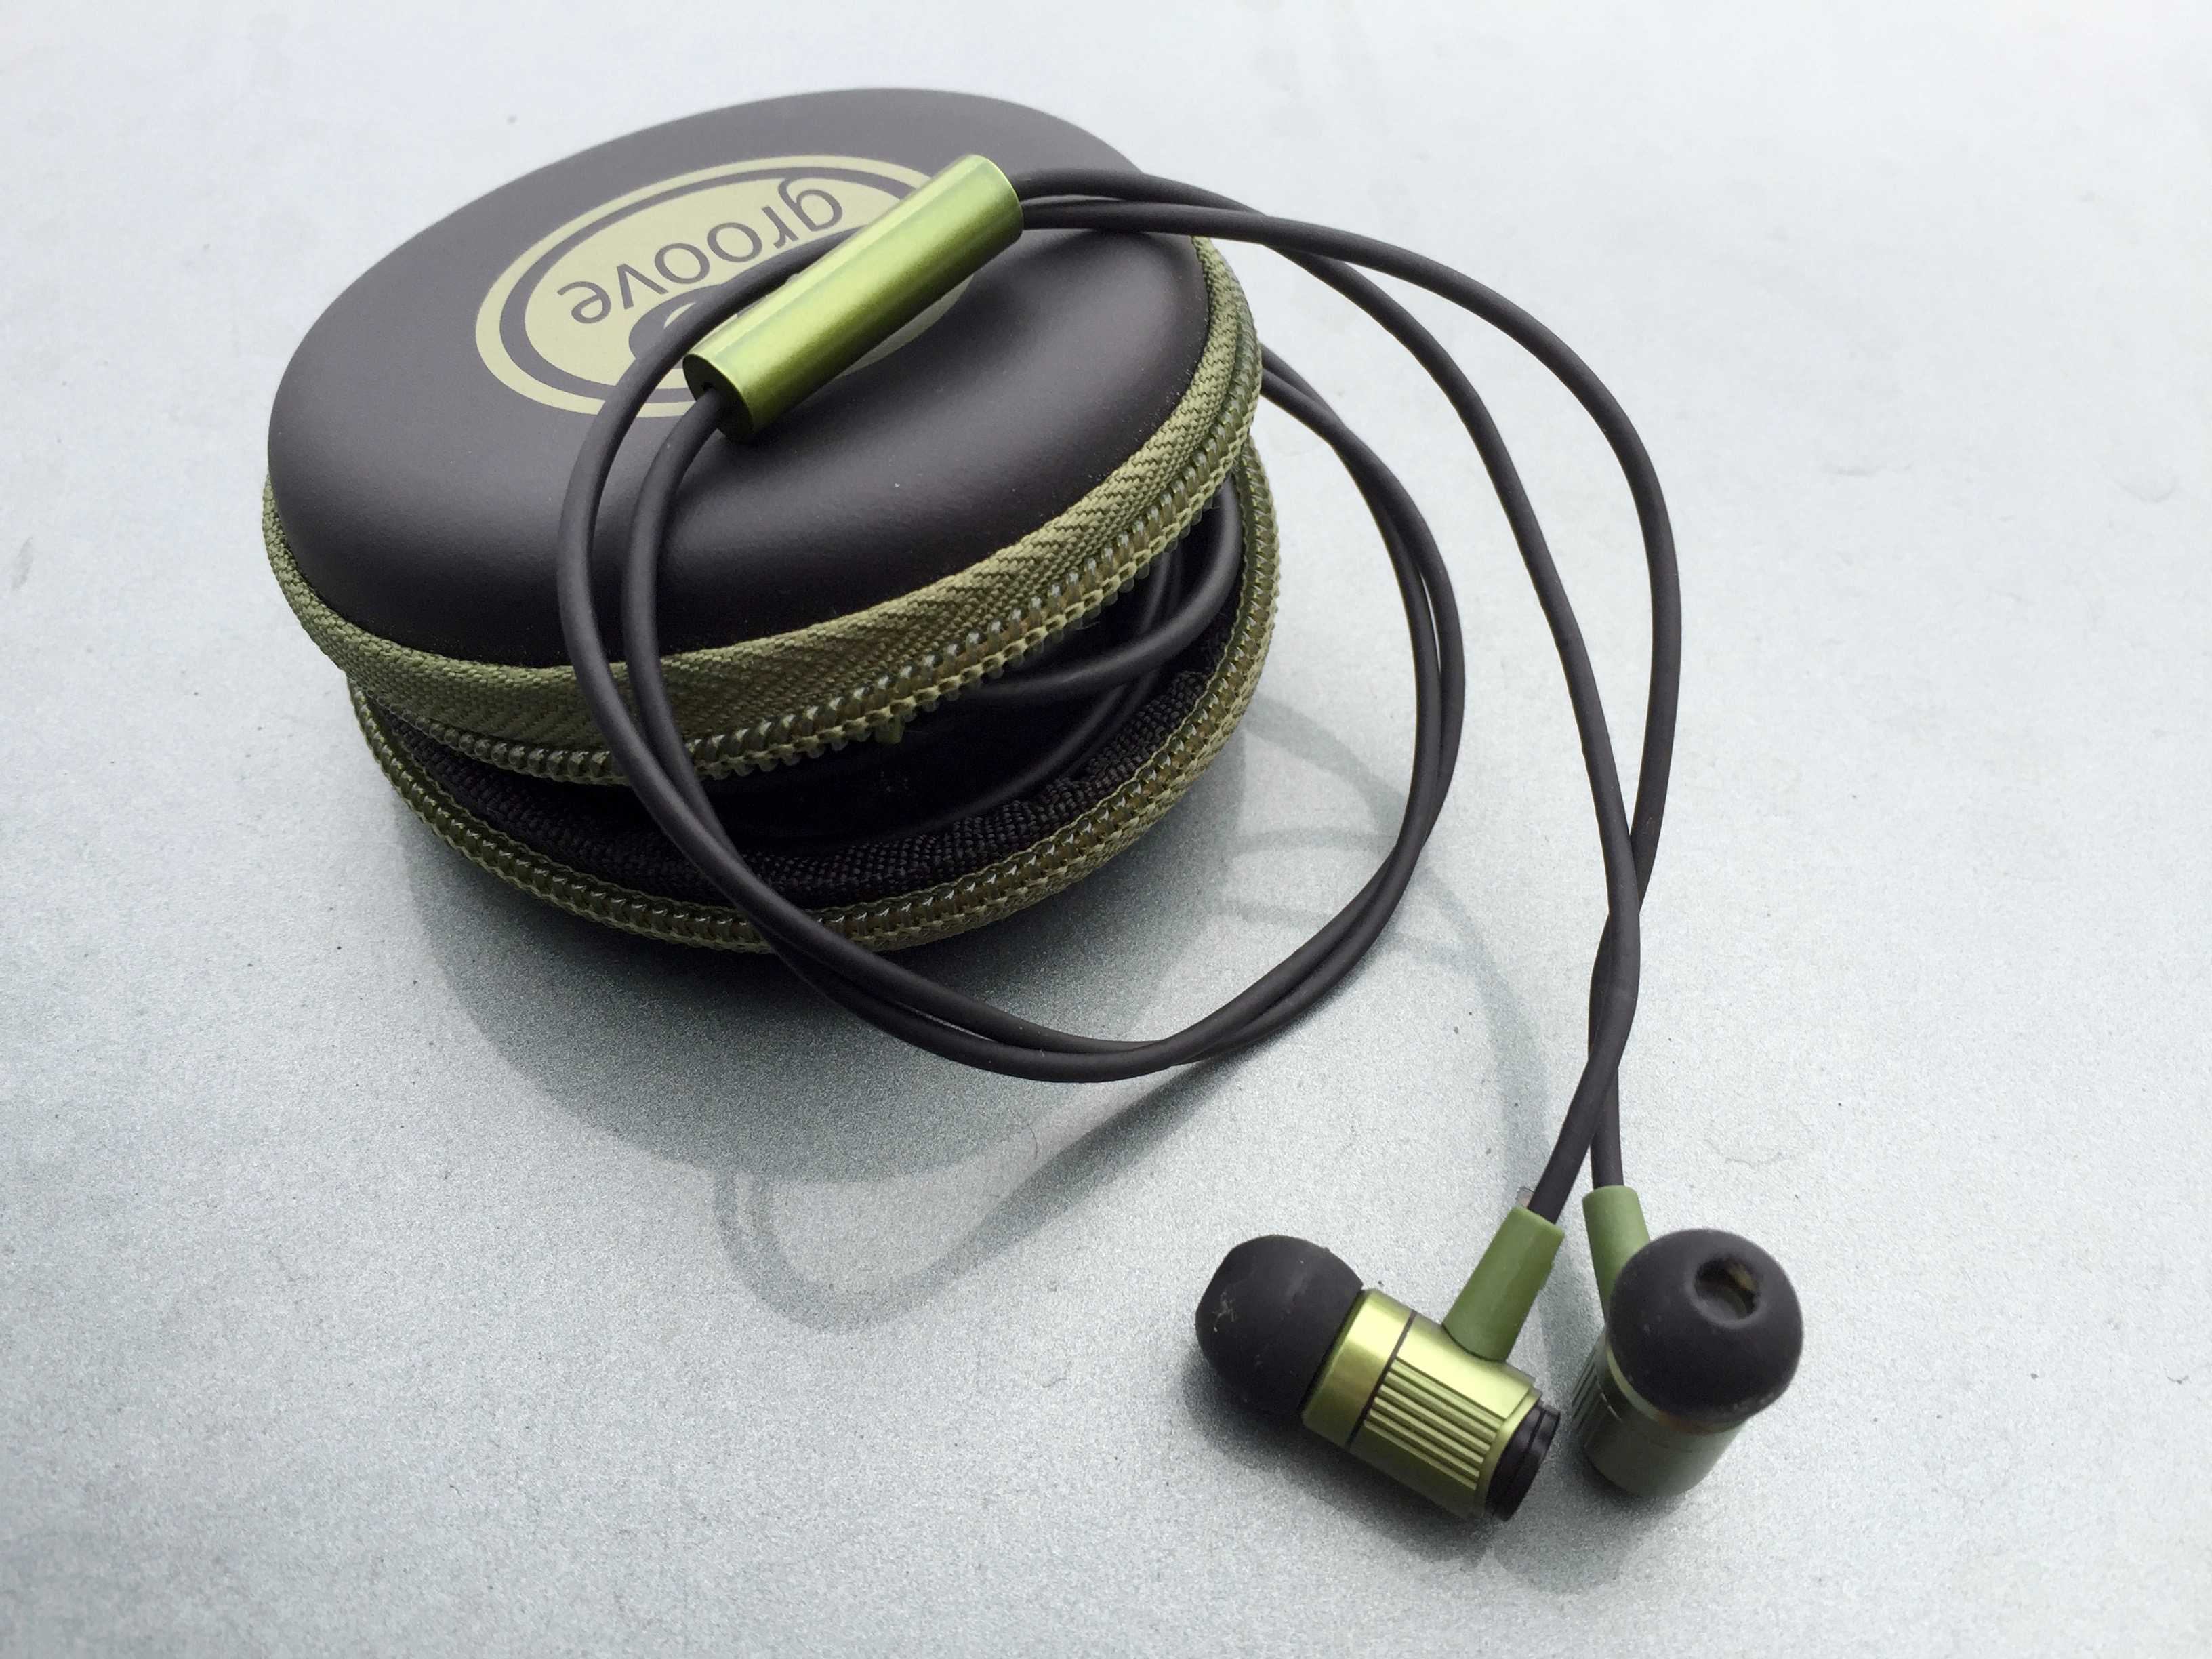 These earbuds are so rugged, you'll love them a long time.